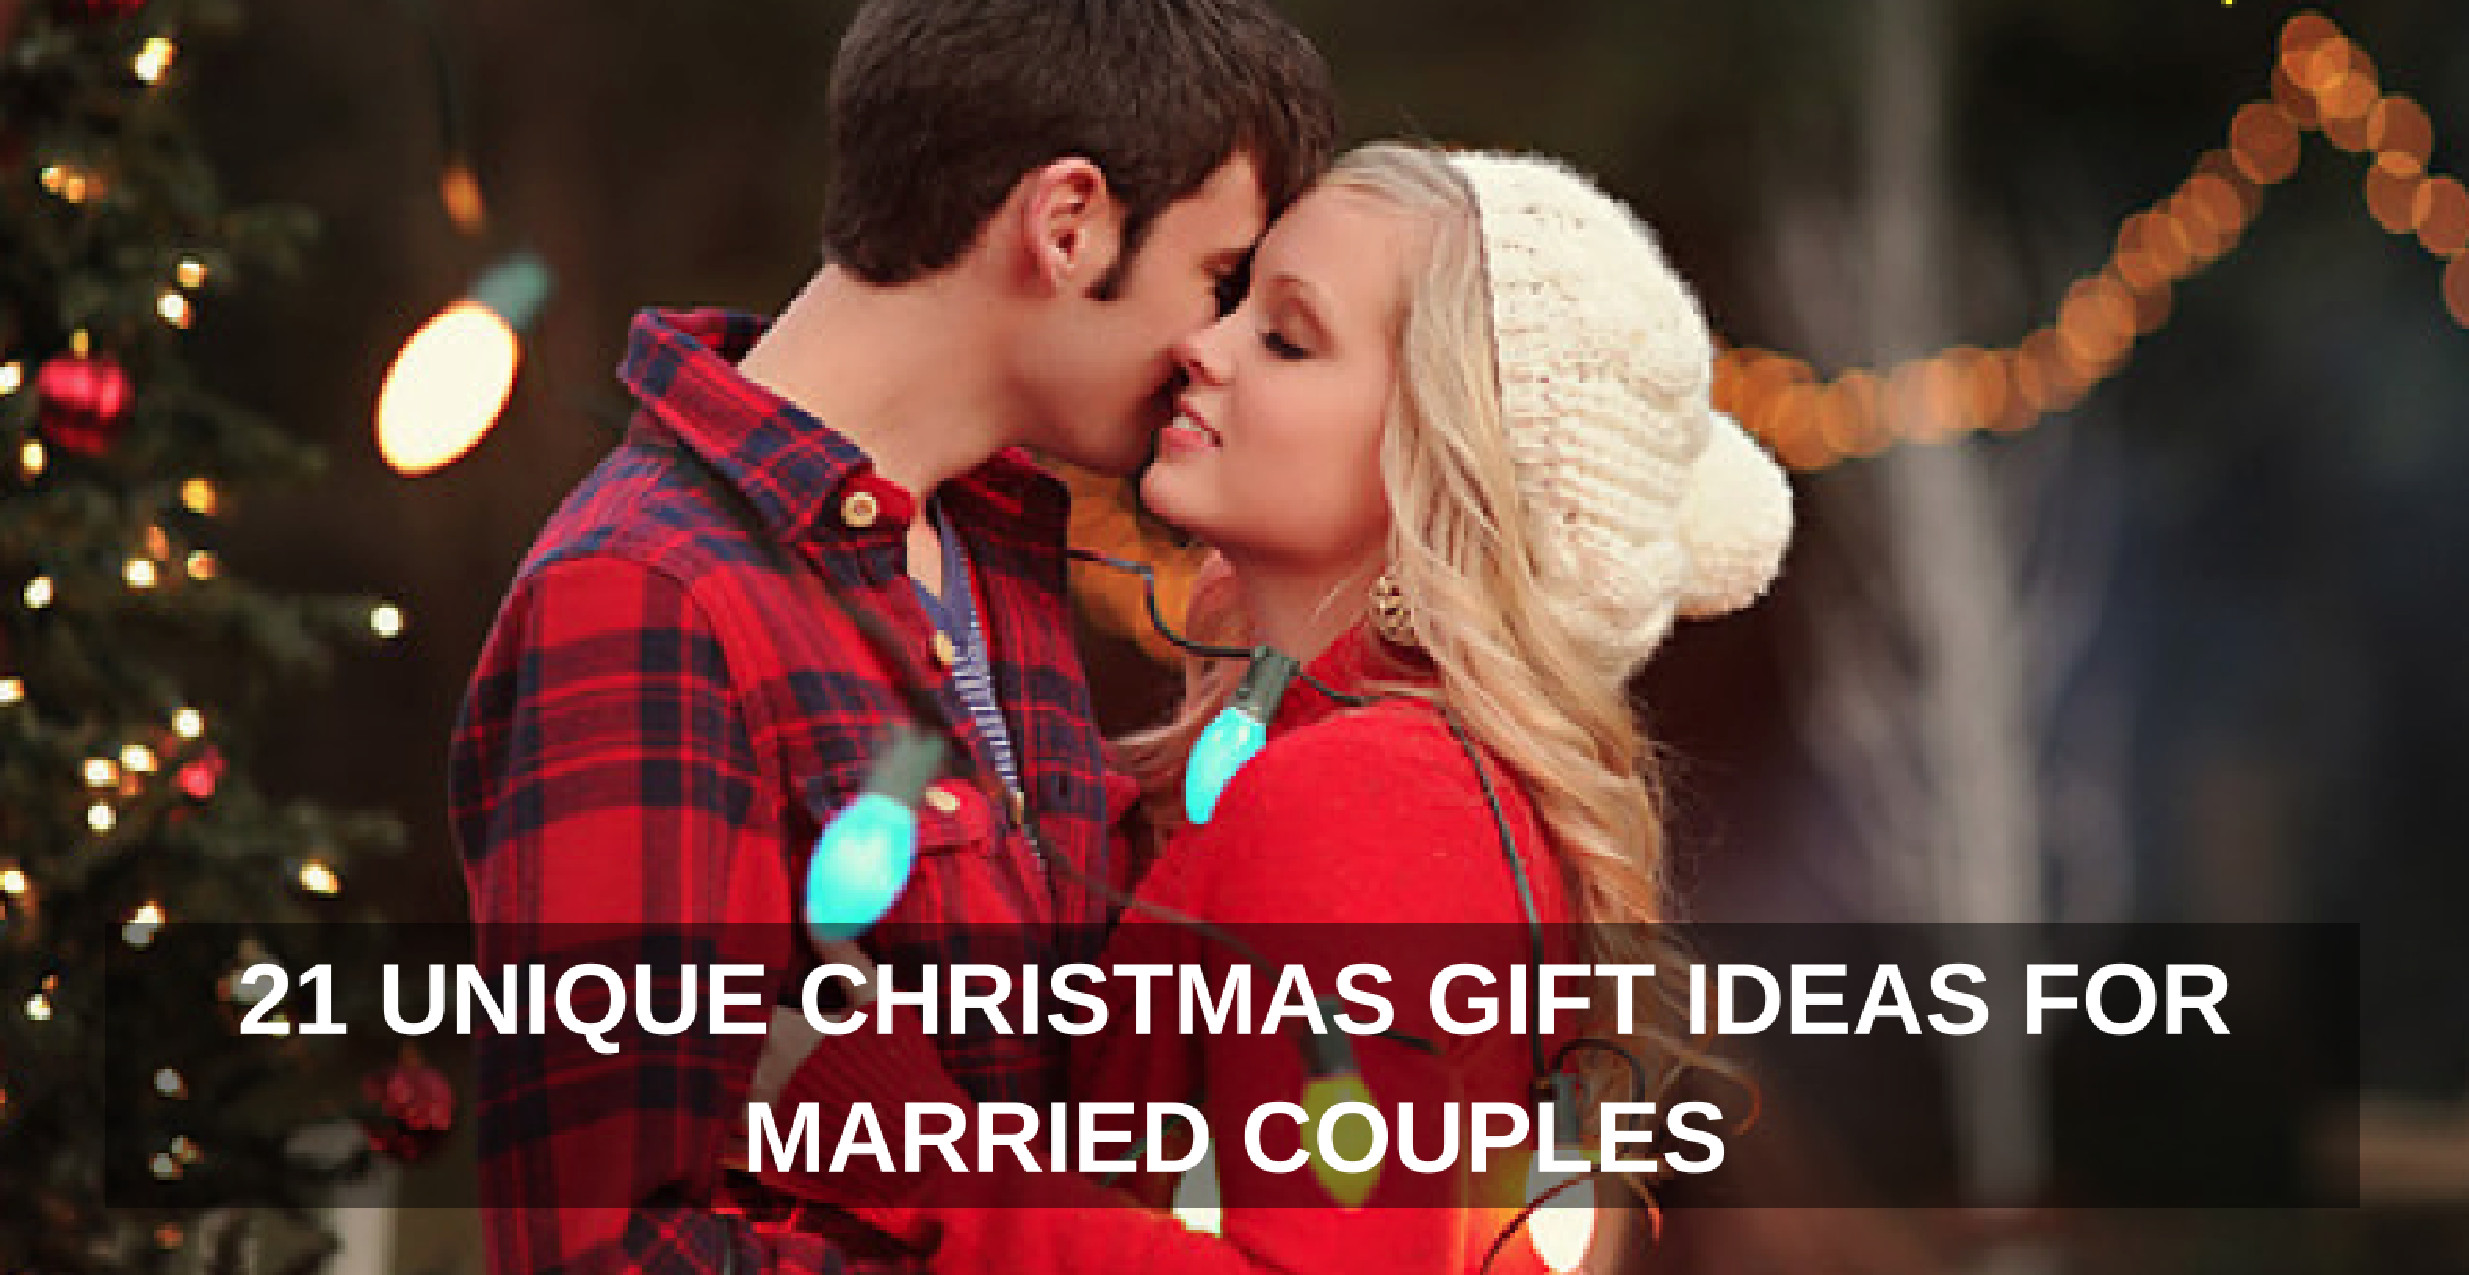 Cool Gift Ideas For Couples
 21 Unique Christmas Gift Ideas for Married Couples